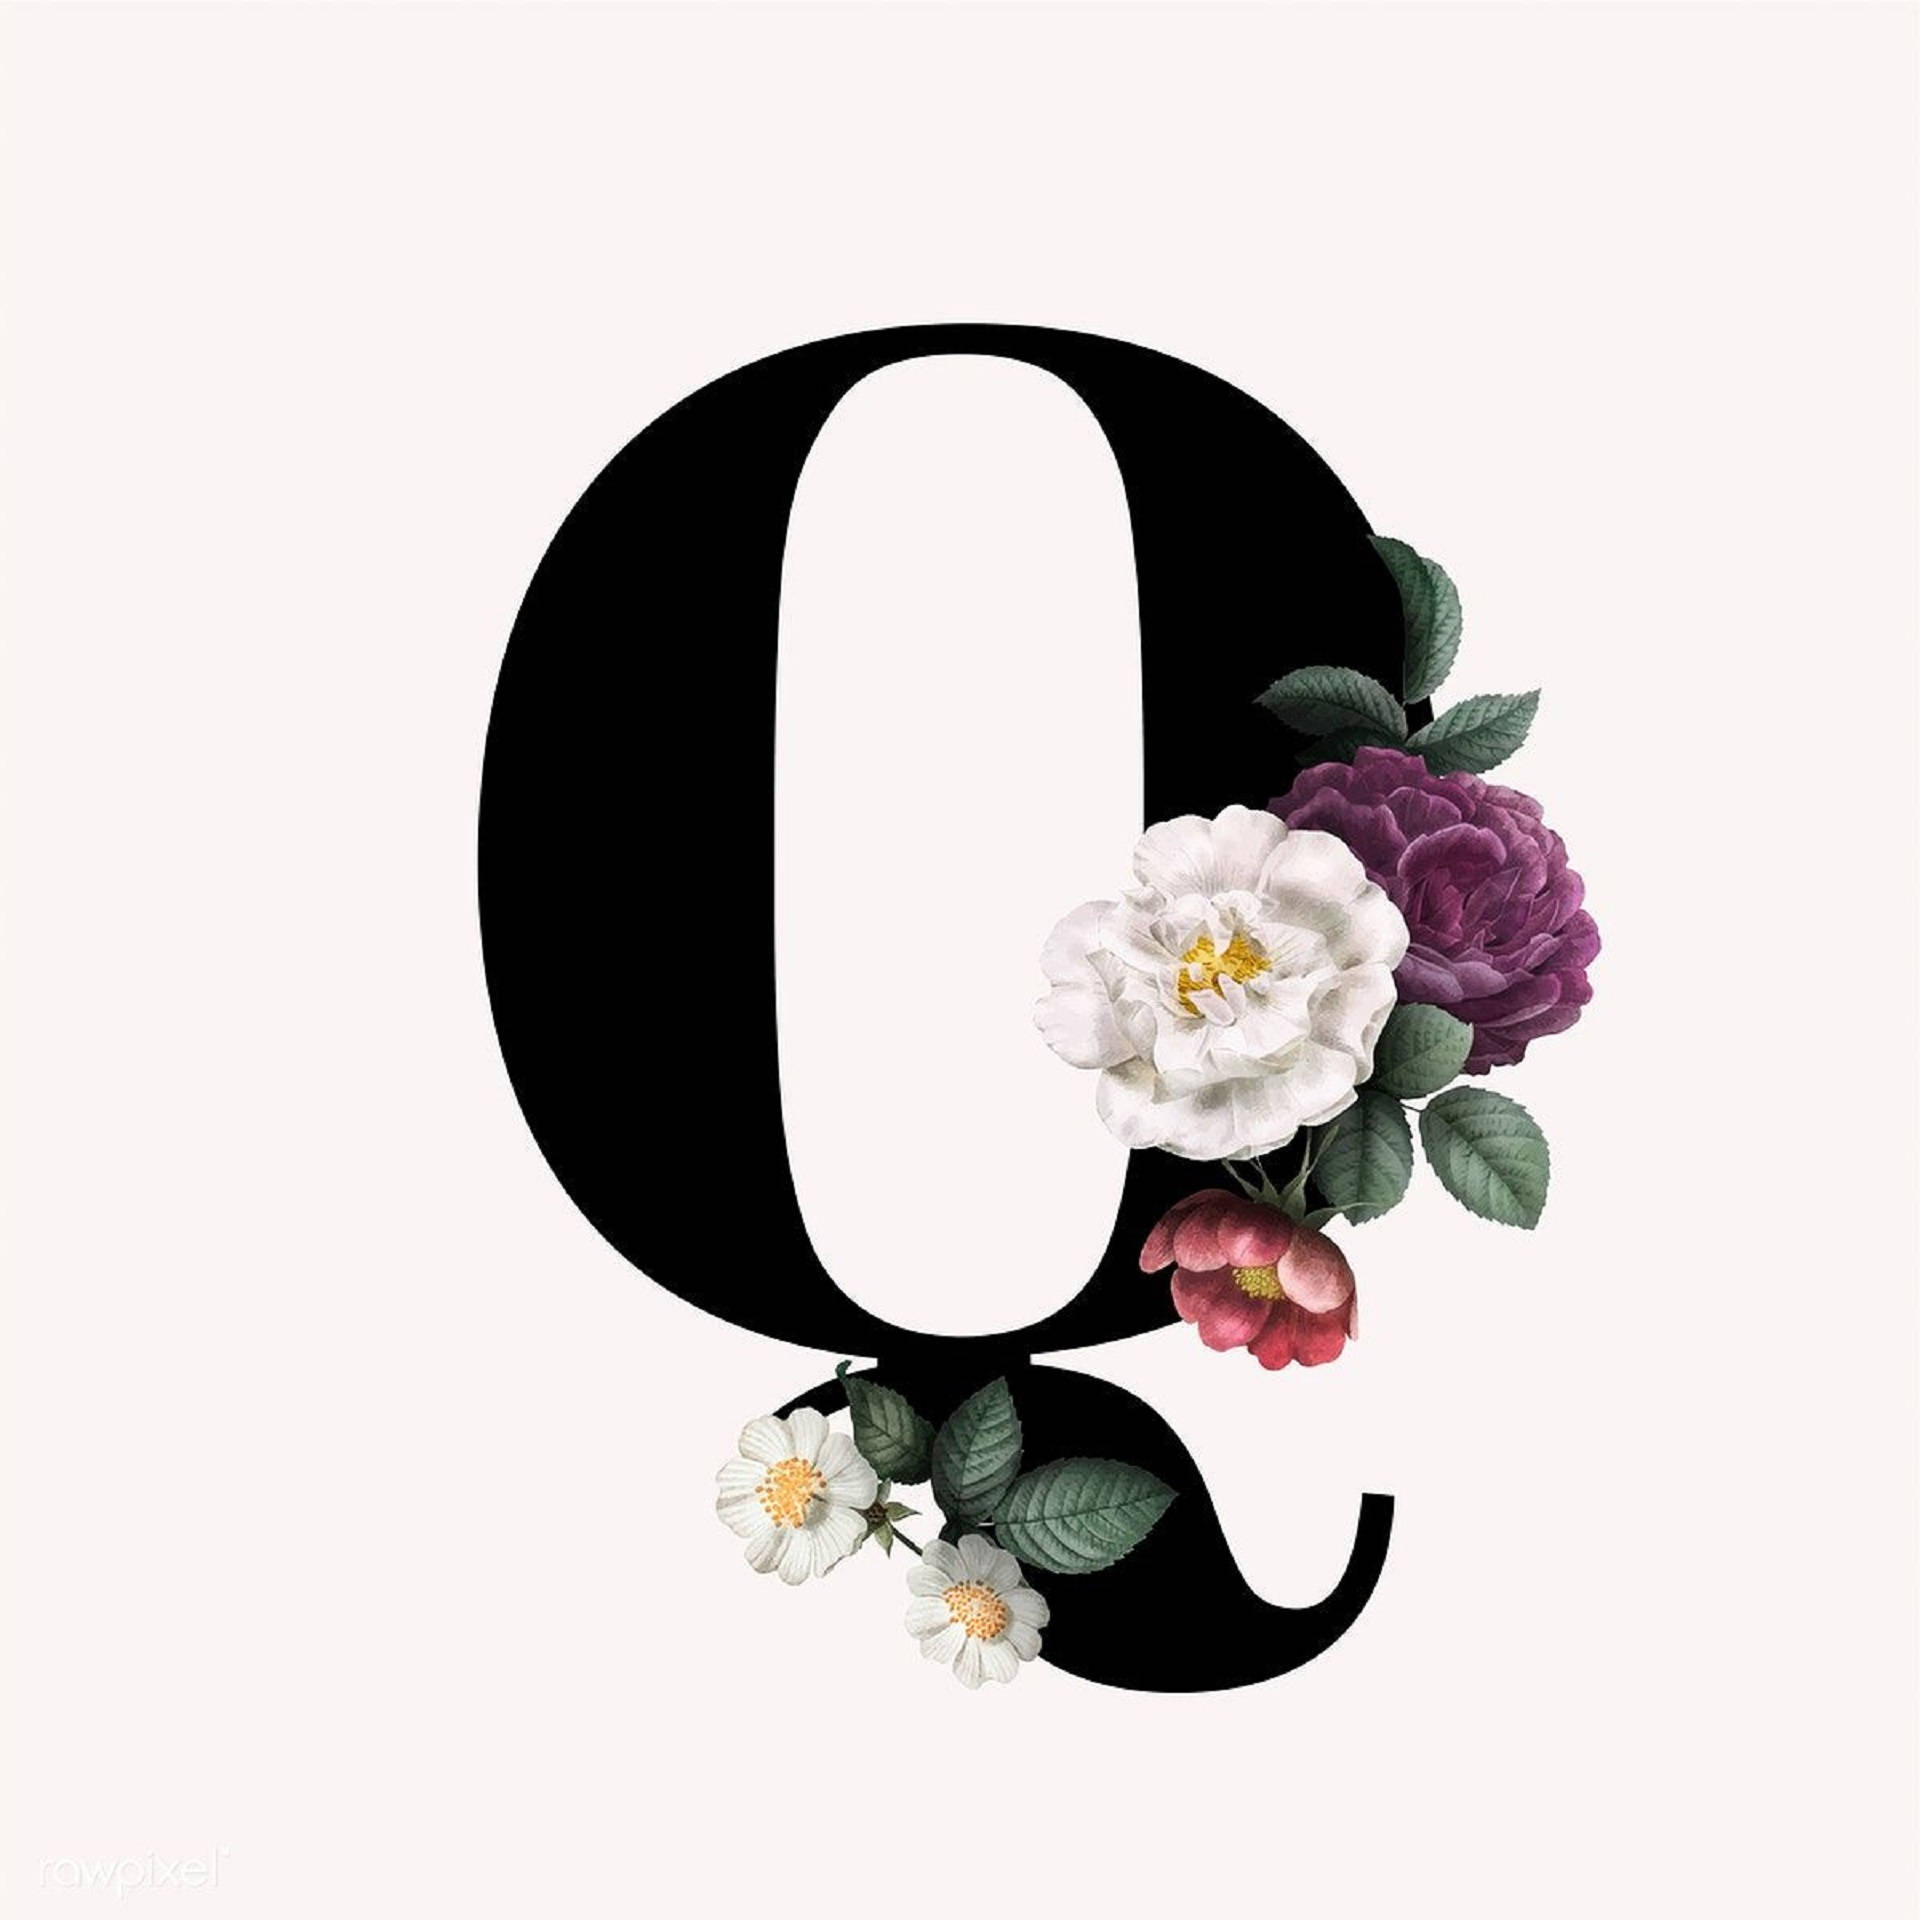 Letter Q With Flowers Wallpaper